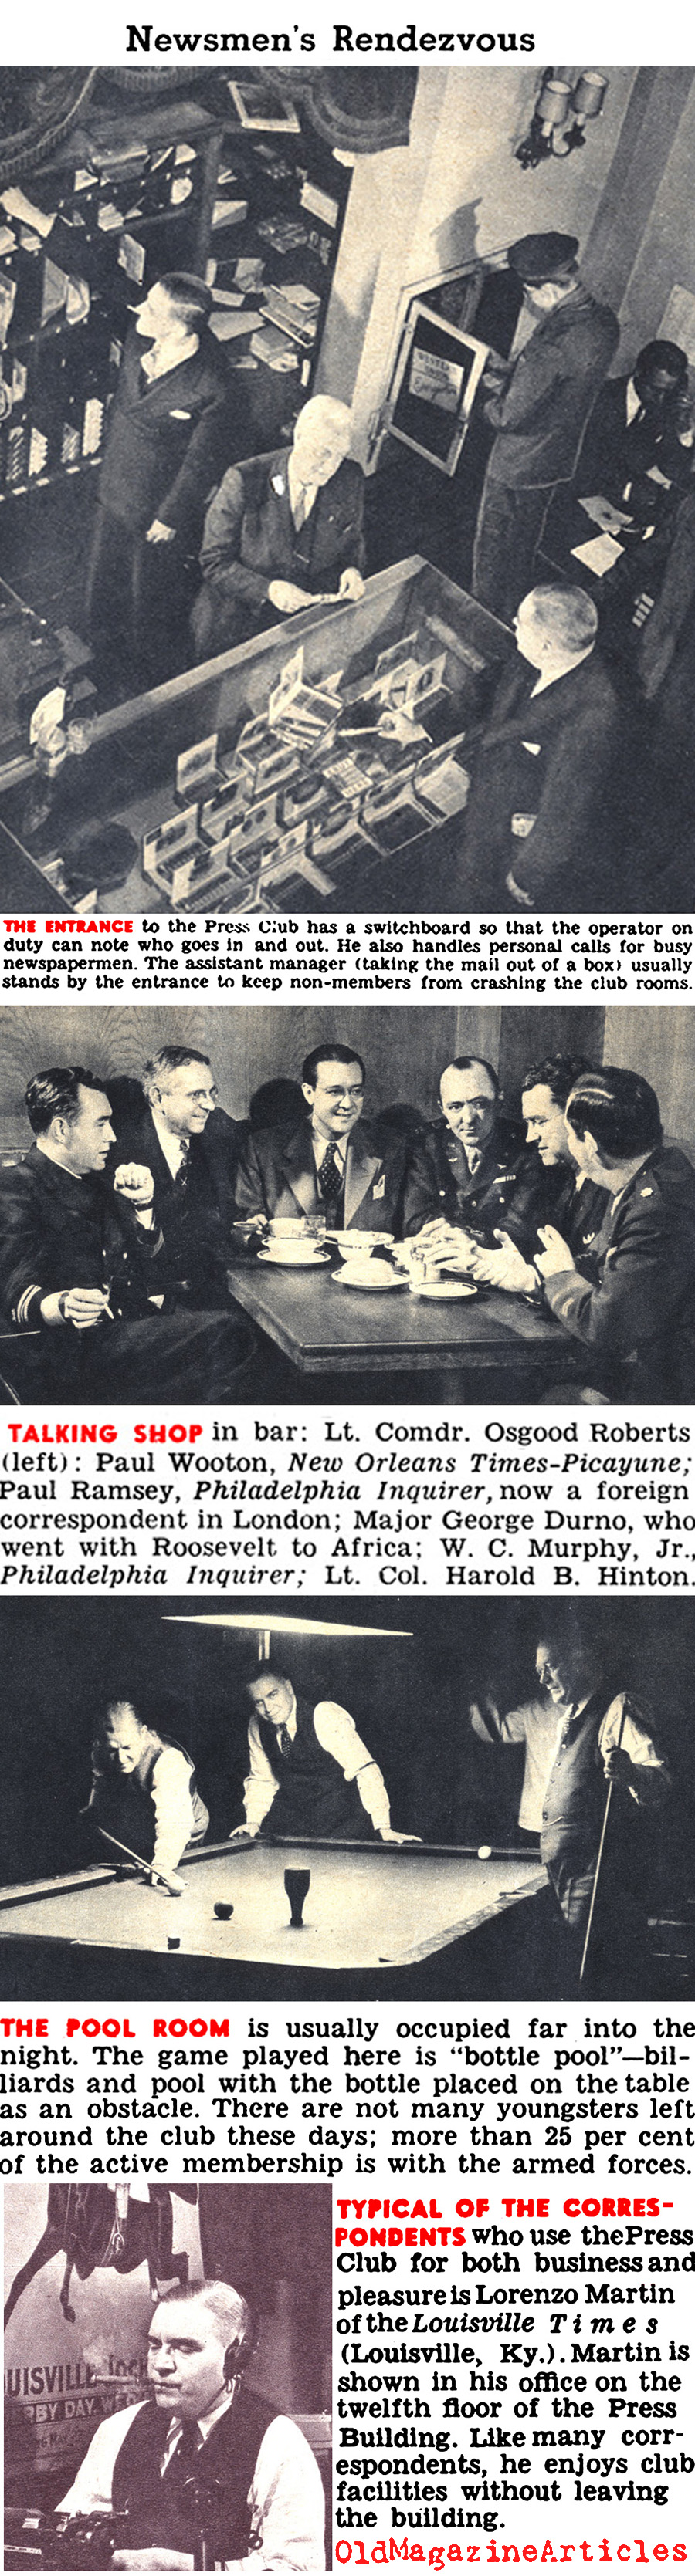 The National Press Club During the War (Click Magazine, 1943)